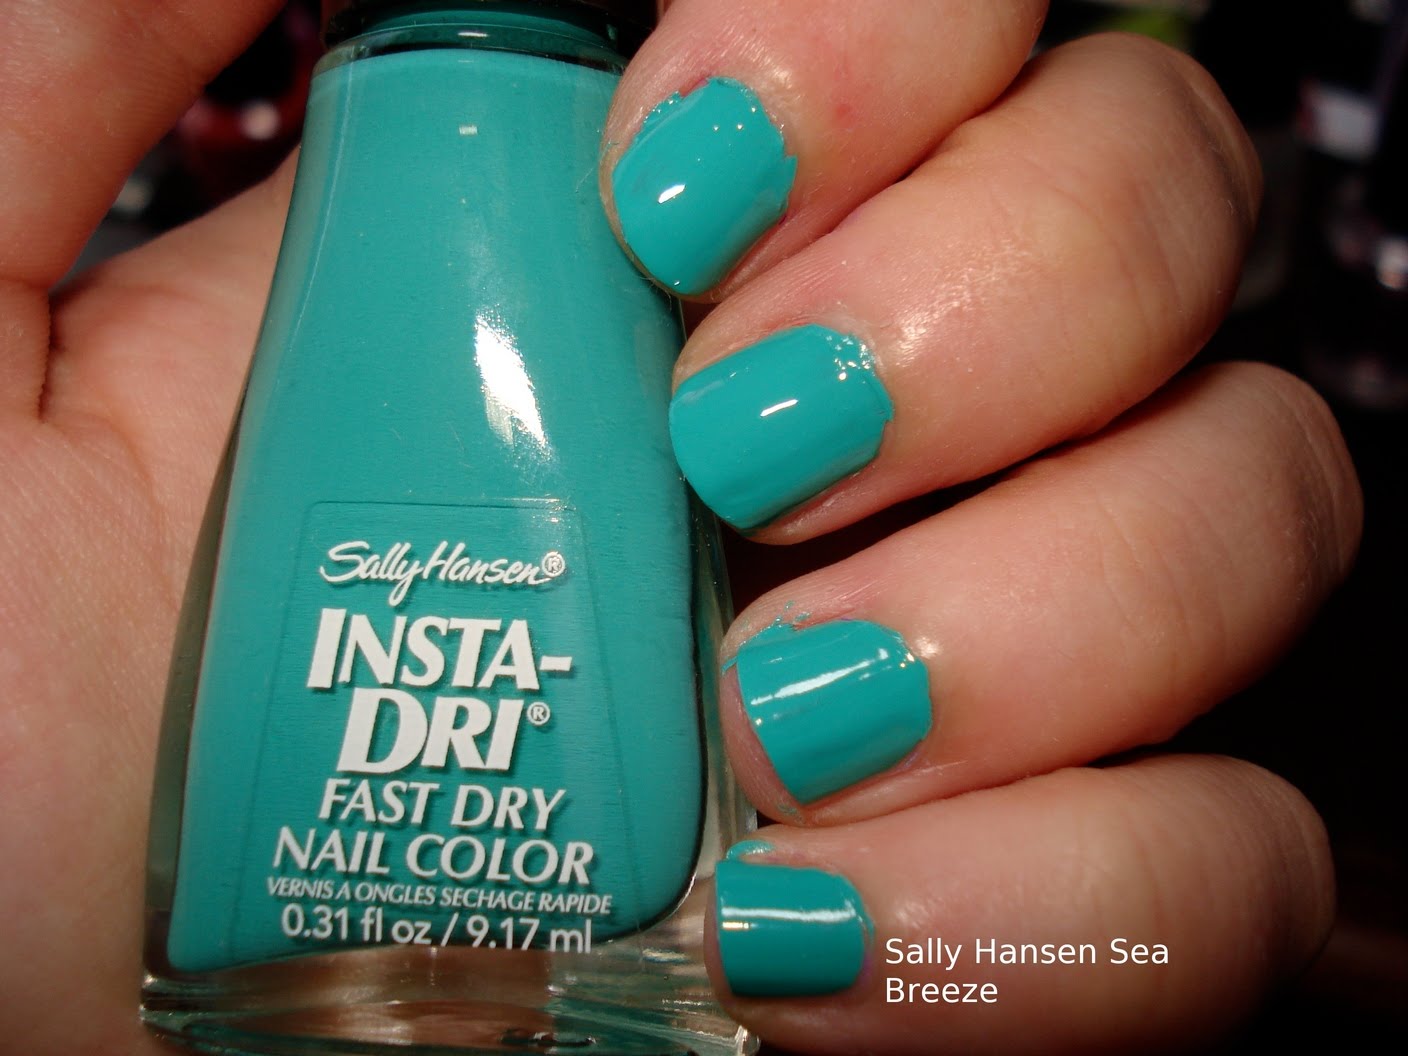 2. Get 20% off Sally Hansen Insta-Dri Nail Color with this printable coupon - wide 1